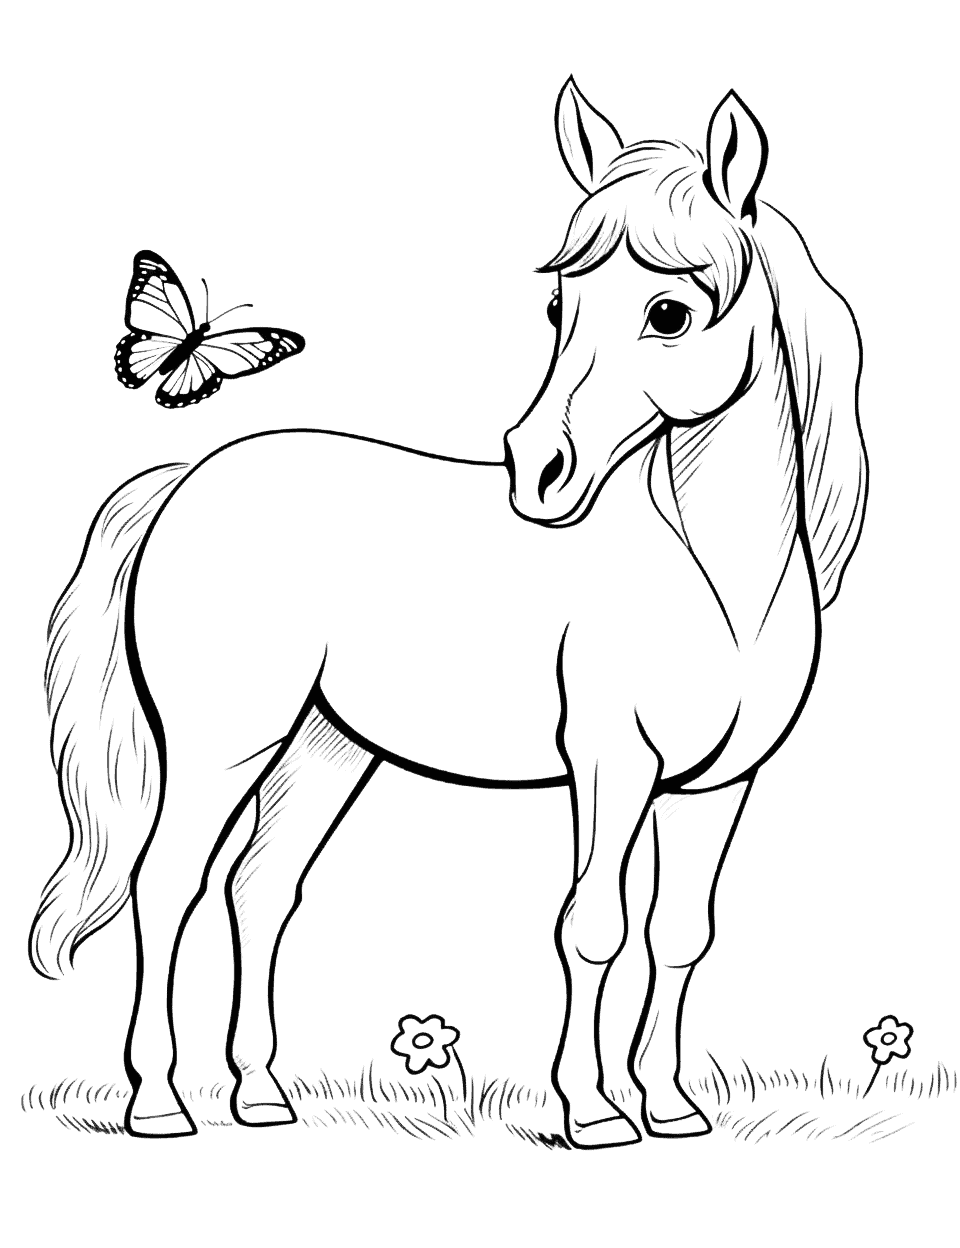 Cute Foal and Butterfly Coloring Page - A cute foal curiously looking at a butterfly flying through the air.